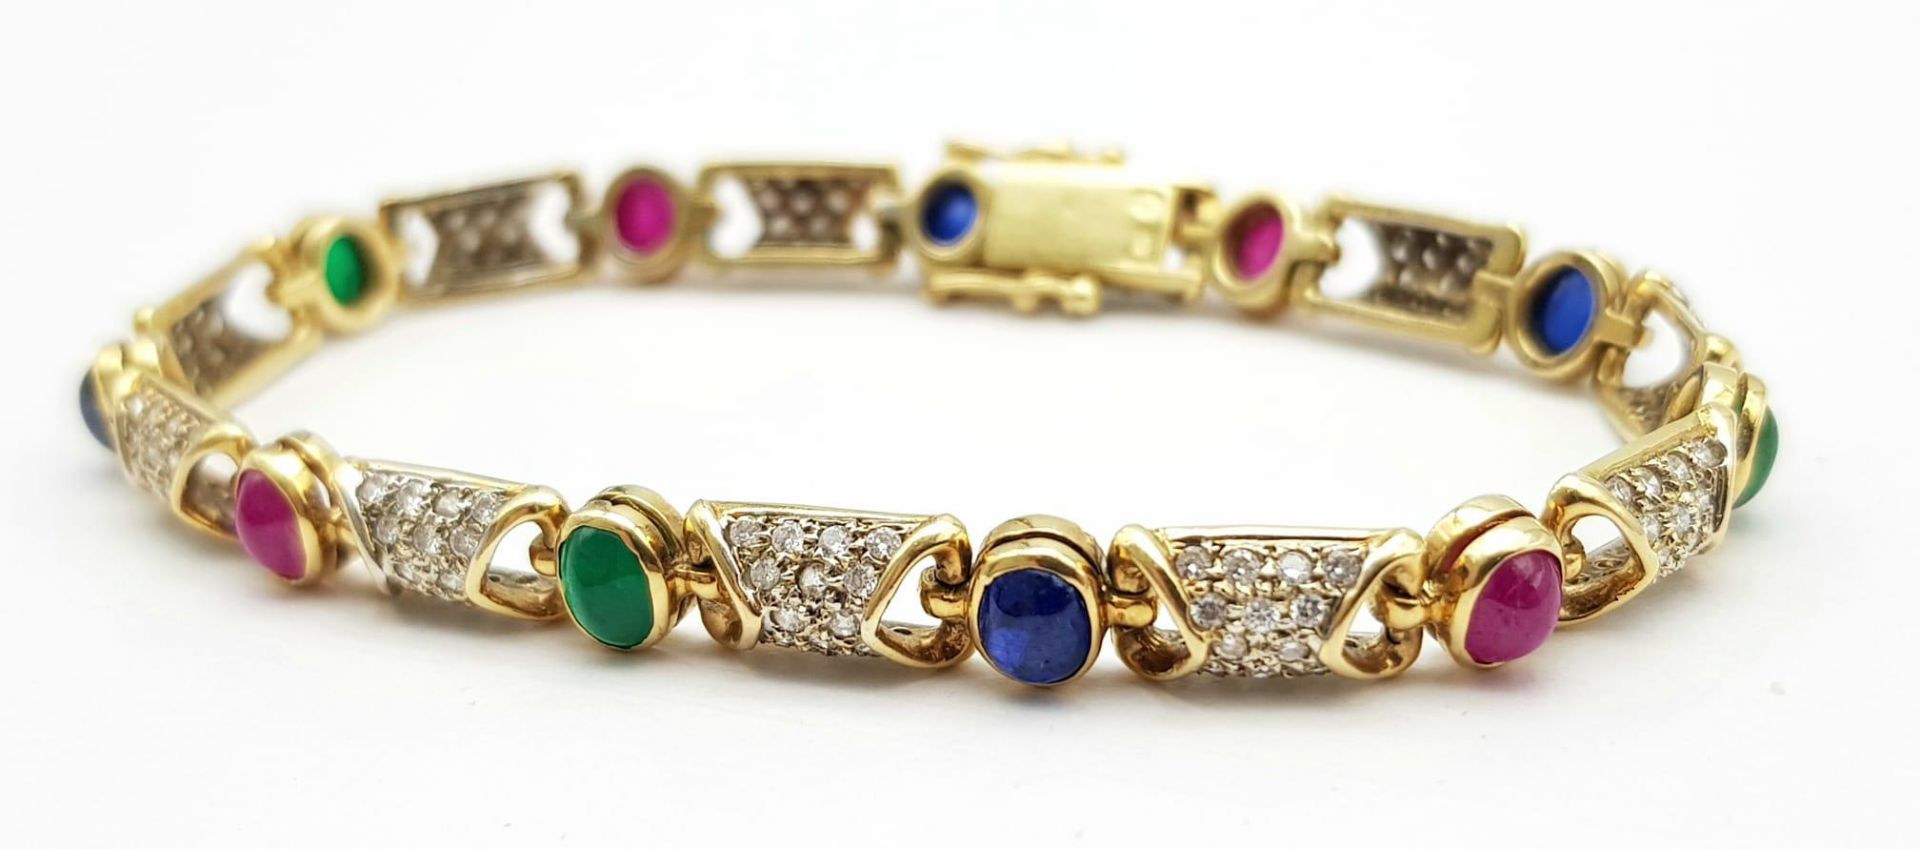 A GORGEOUS 18K YELLOW GOLD DIAMOND, SAPPHIRE, RUBY & EMERALD SET BRACELET. 1.50CTW OF ENCRUSTED - Image 3 of 6